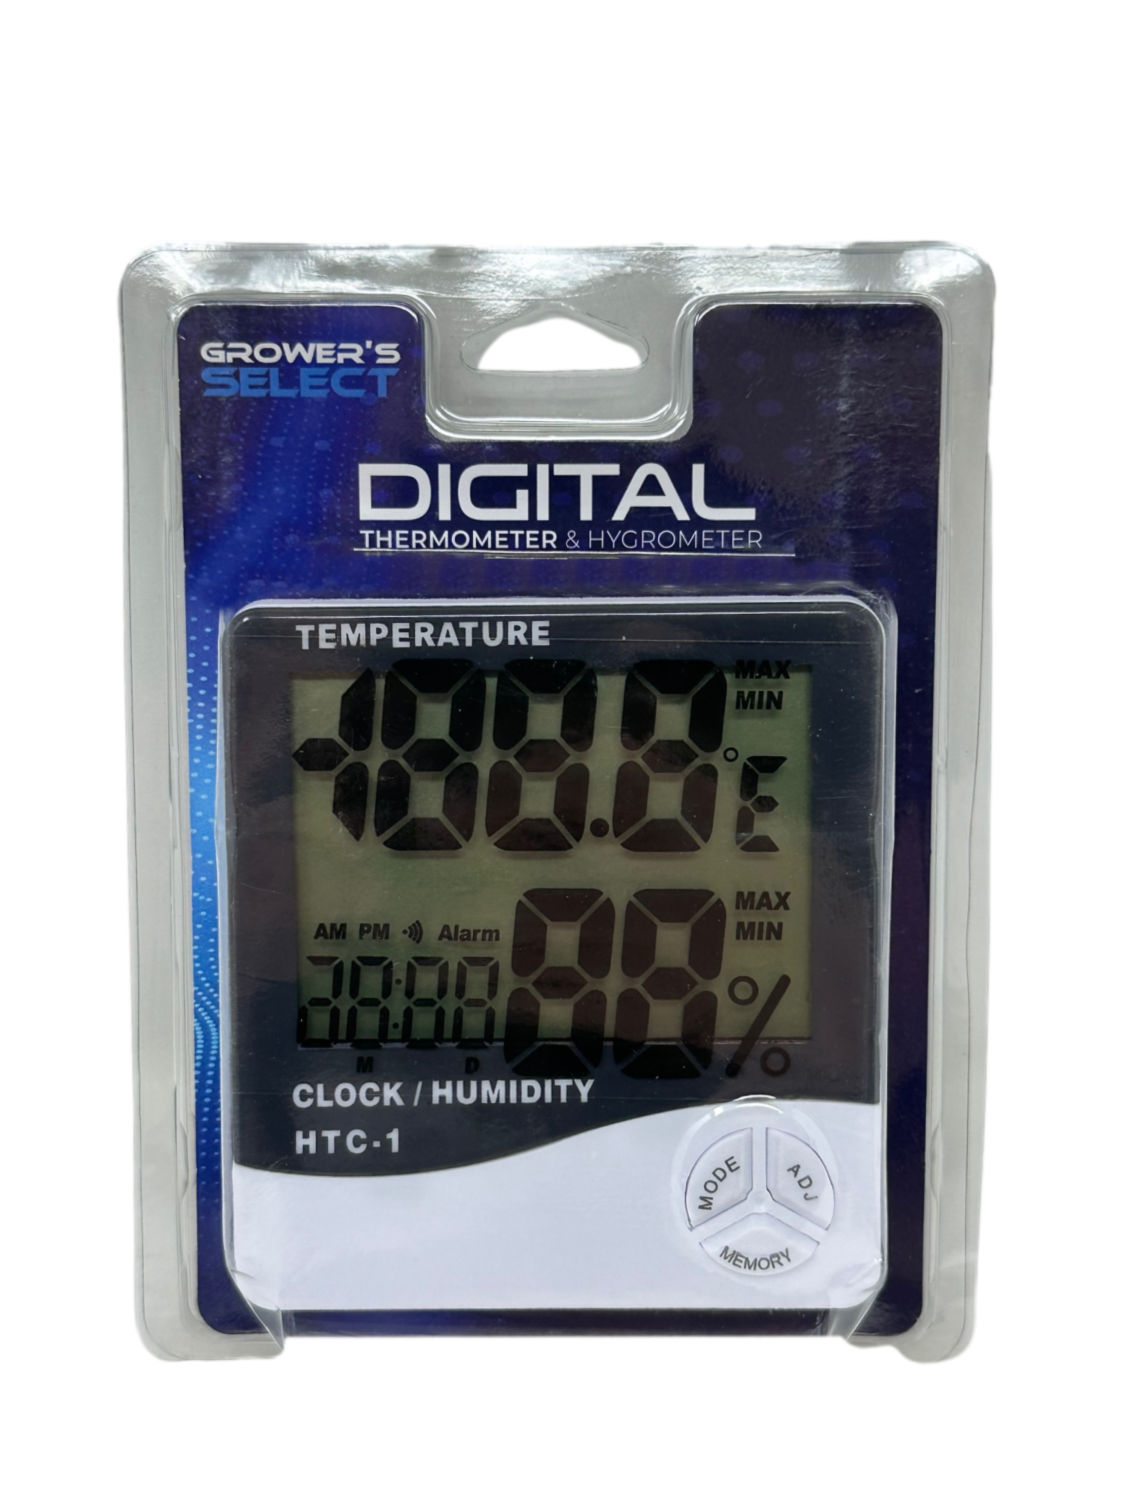 http://www.midwestgrowkits.com/Shared/Images/Product/Digital-Thermometer-Humidity-Meter-HTC-1/Growers_select_thermometer_web.jpg